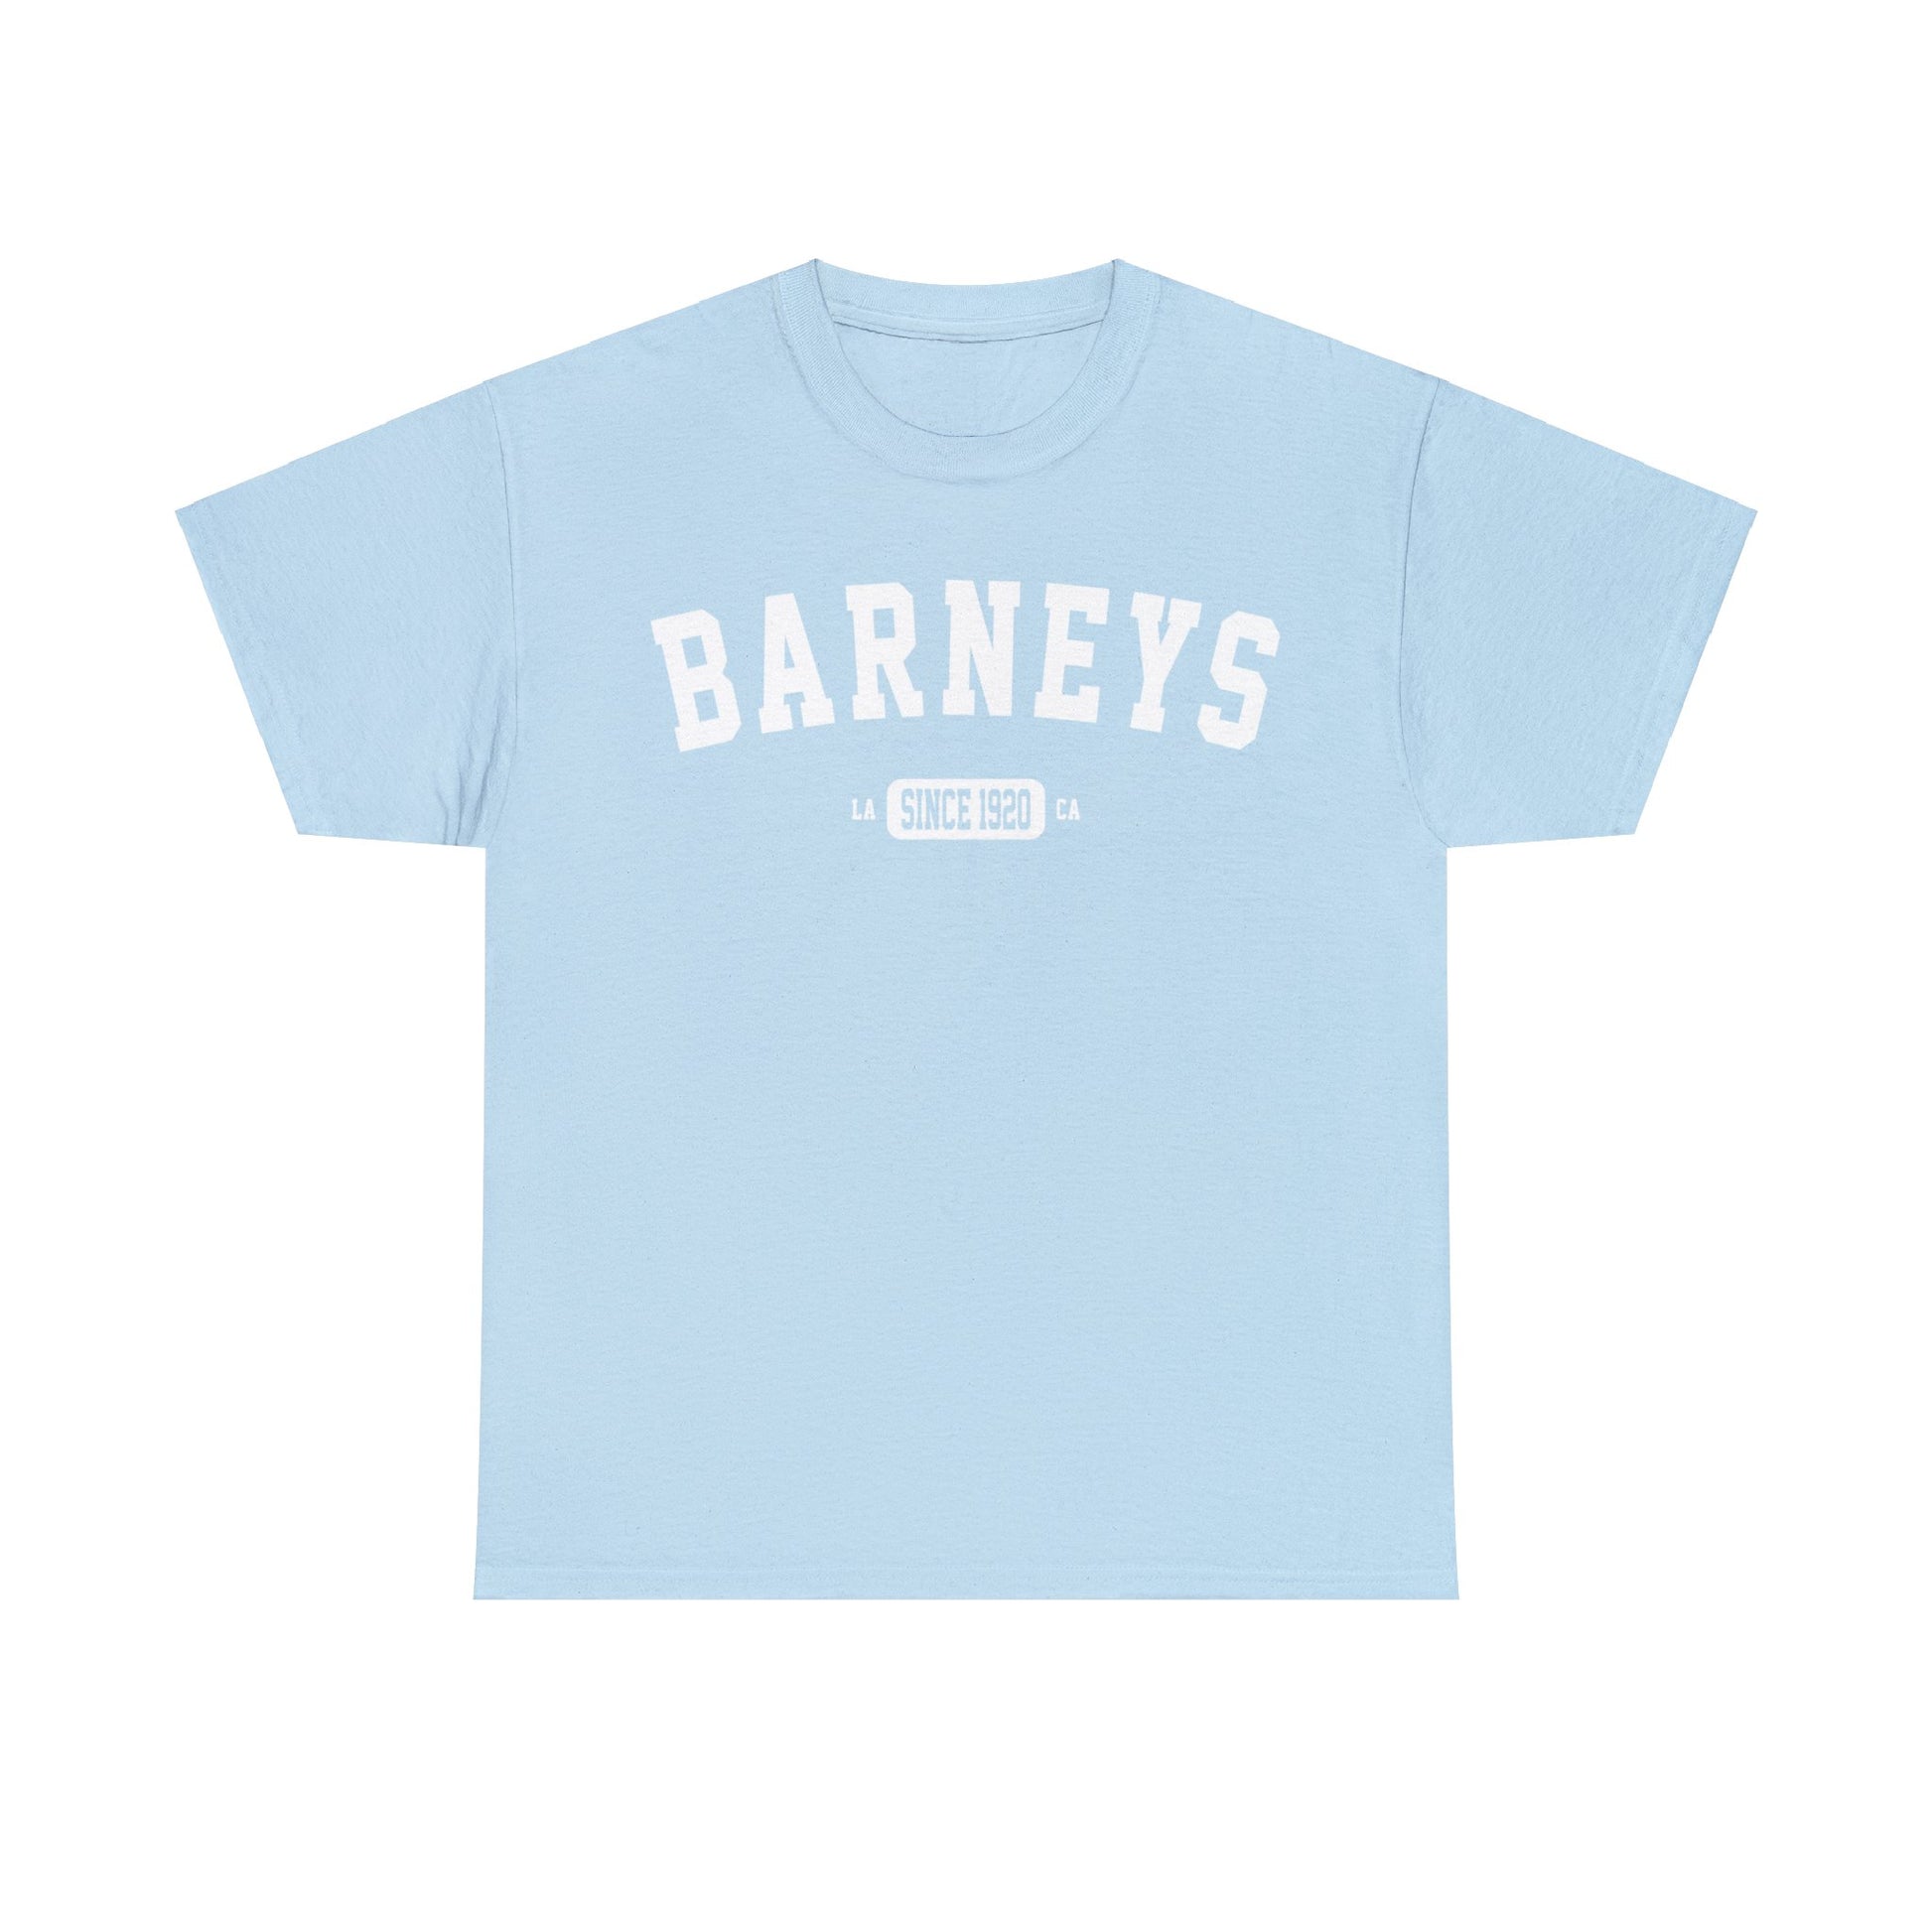 Vintage Collegiate | BARNEY'S BEANERY - Women's Graphic Tee | Light Blue Gildan 5000 T-Shirt, White Graphic, Front View Flat Lay